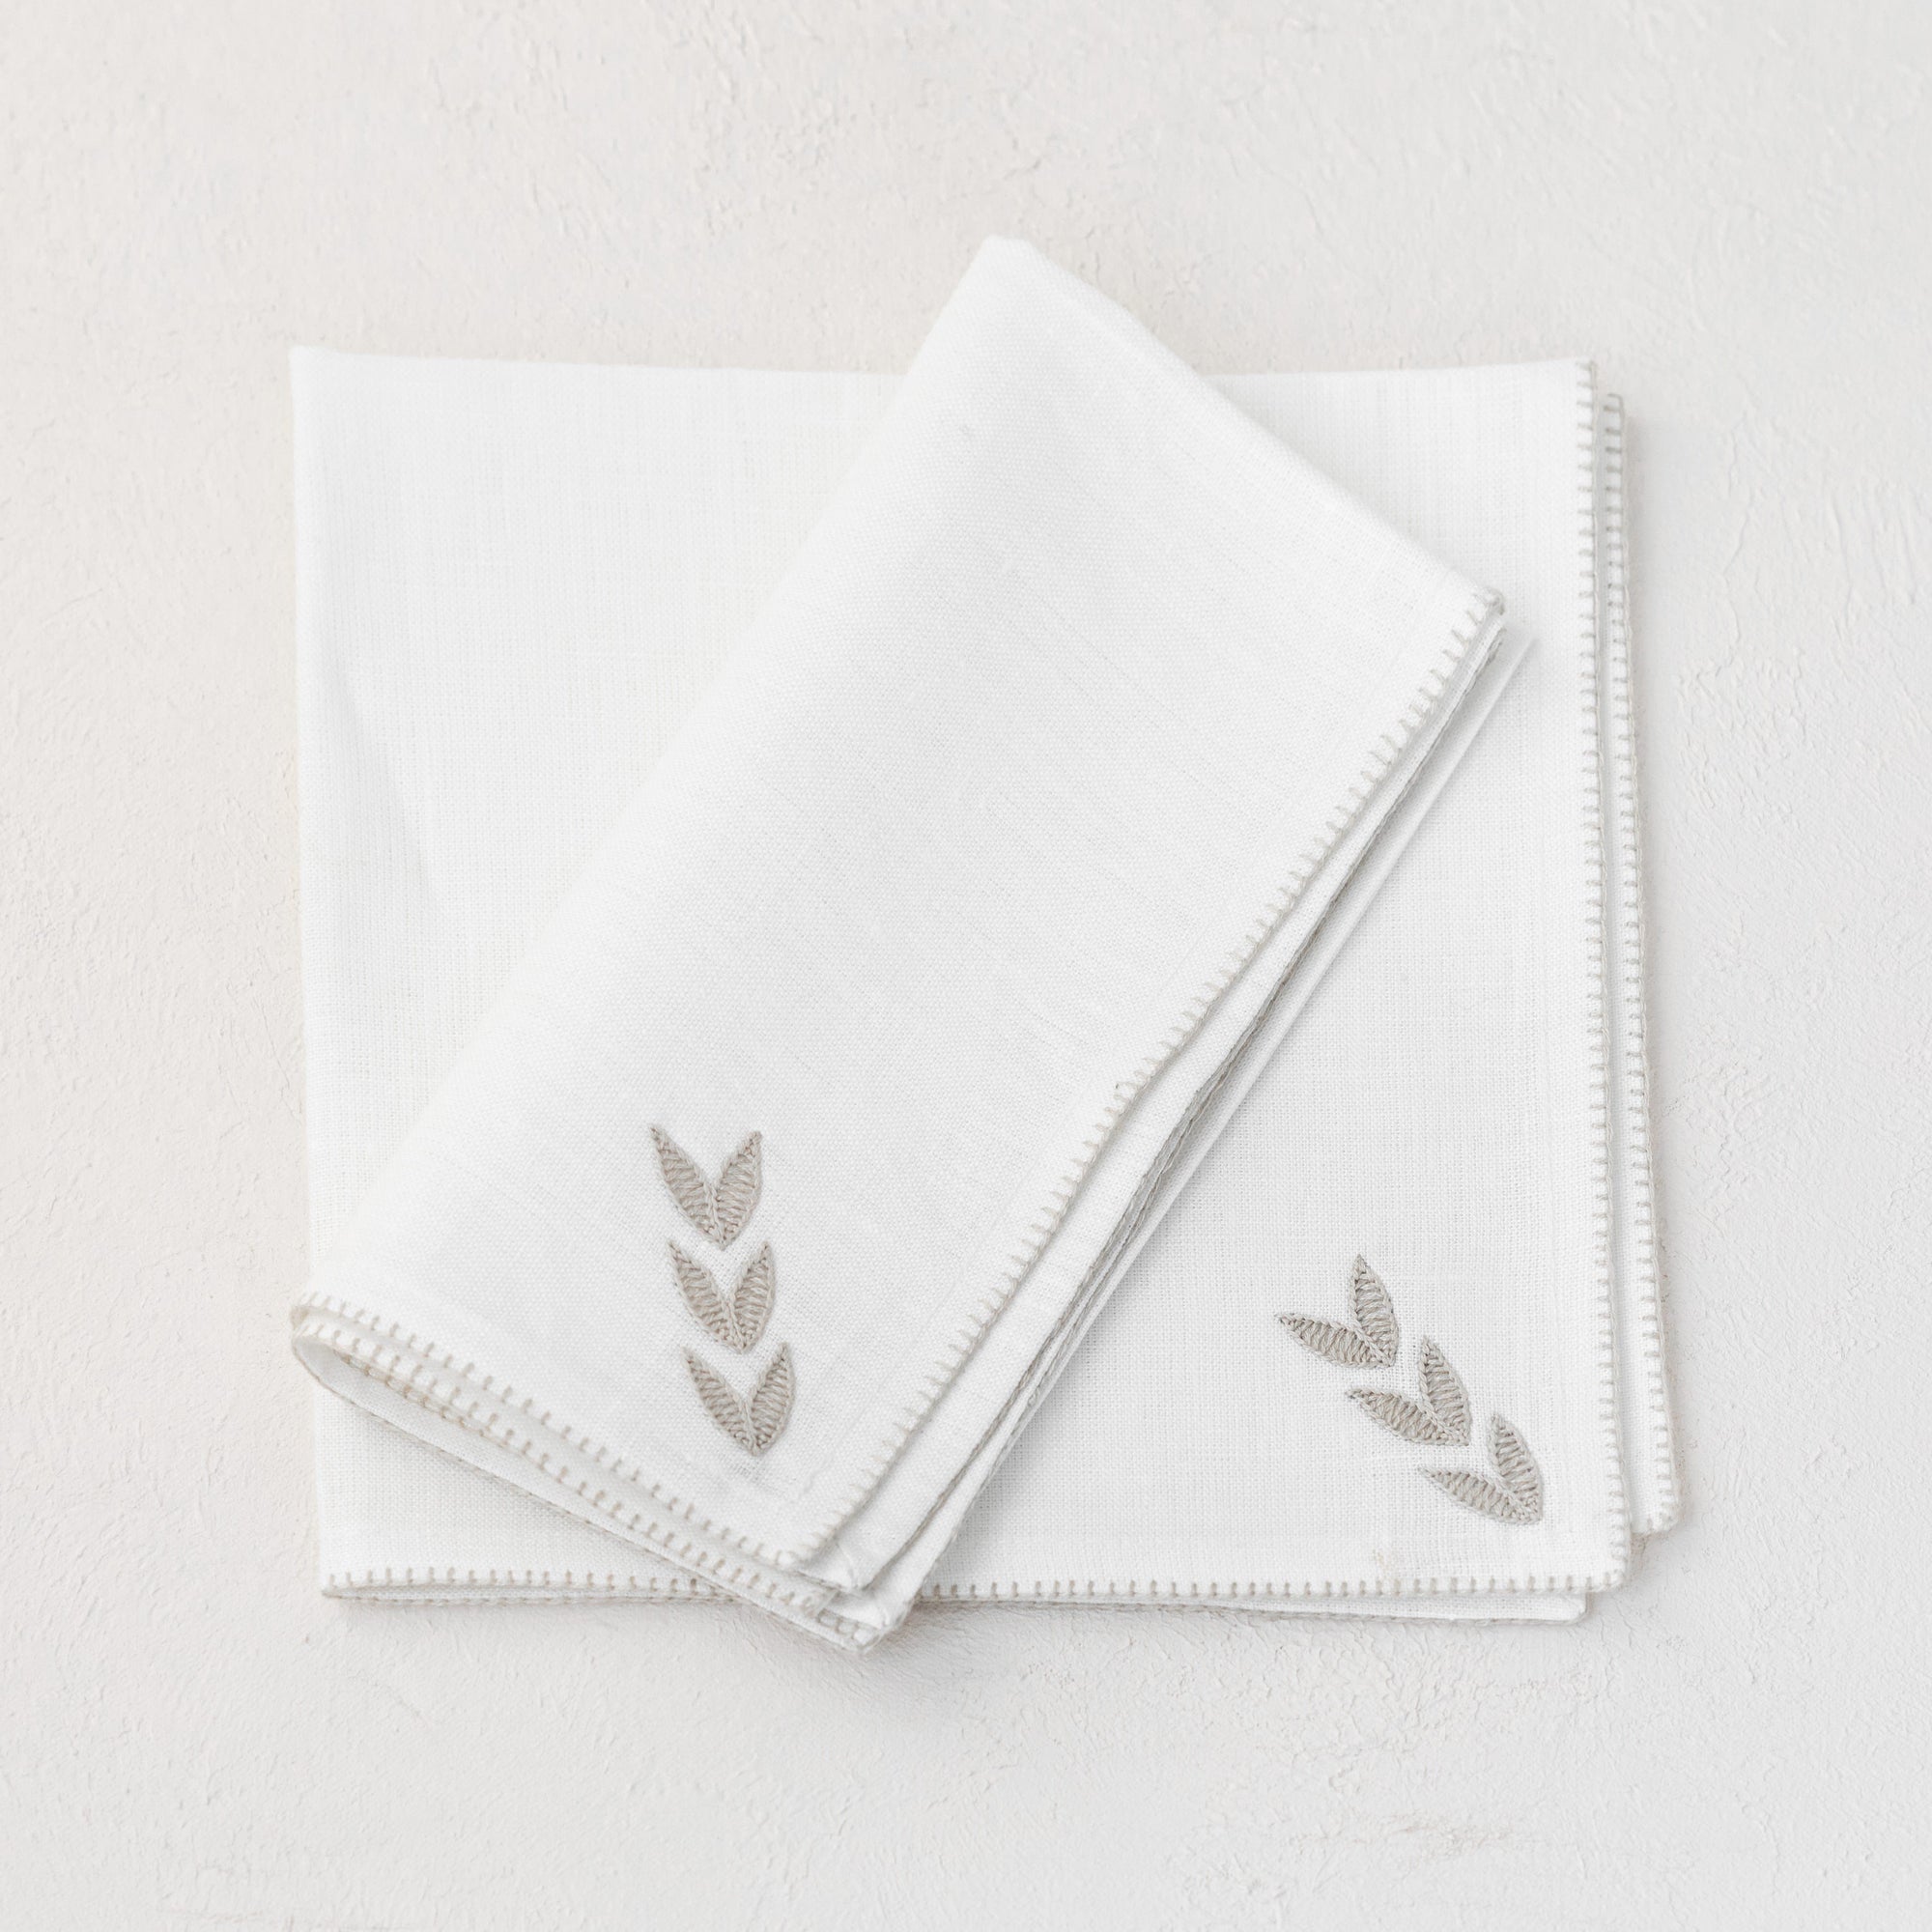 Cream linen napkin hand embroidered with a petal design by Artha Collections